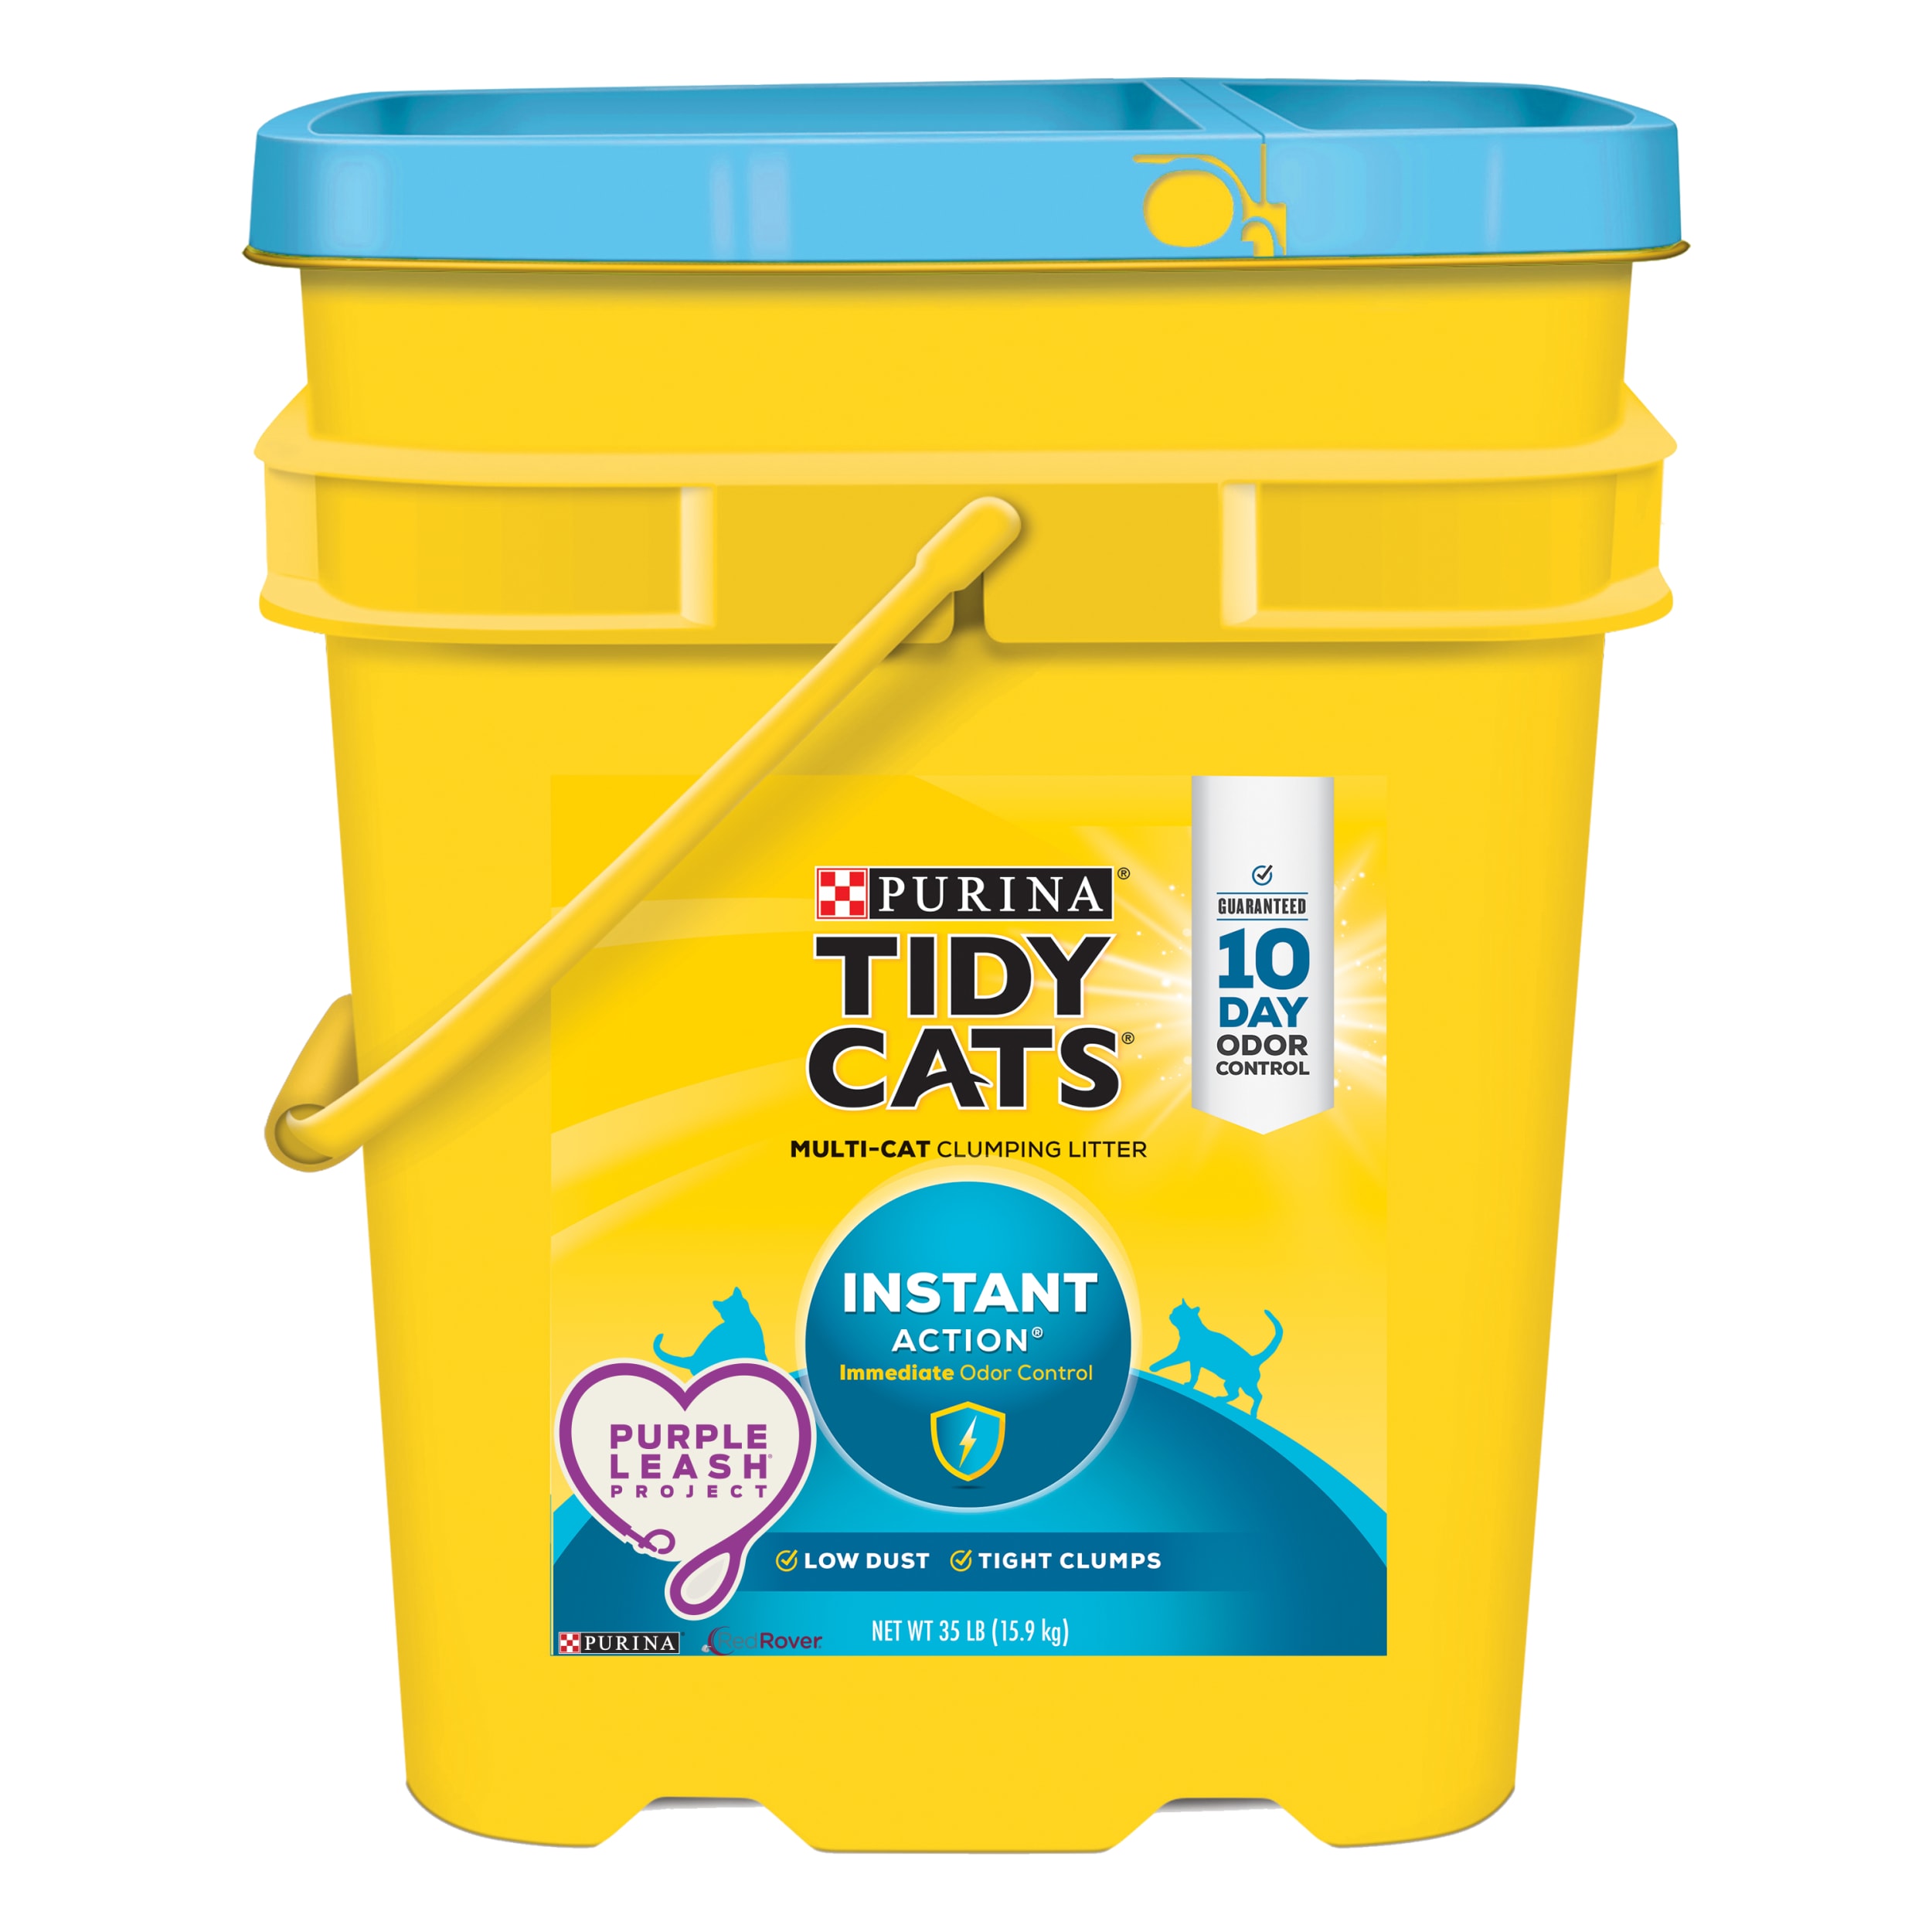 Purina Tidy Cats Multi-Cat Clumping Kitty Litter, Instant Action Deodorizing, 35 lb Jug - image 3 of 12